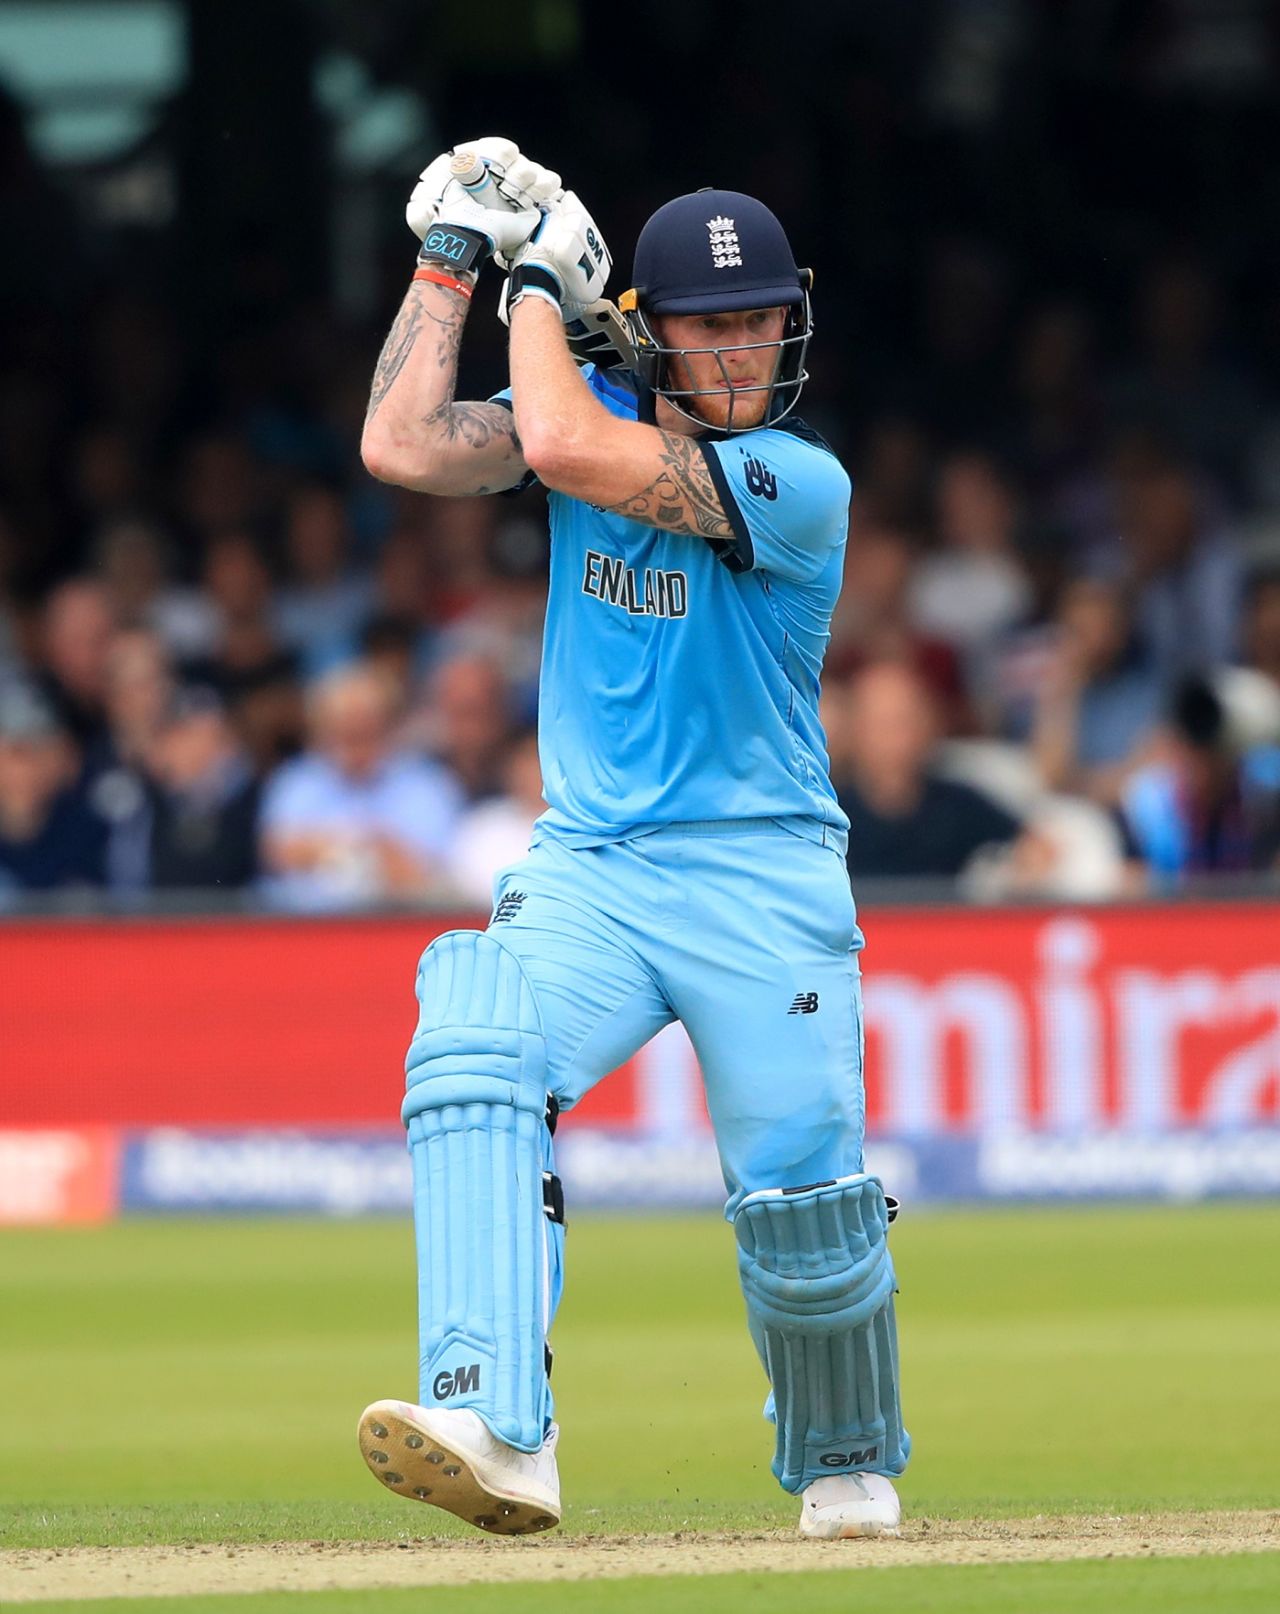 Ben Stokes made a patient fifty, England v Australia, World Cup 2019, Lord's, June 25, 2019